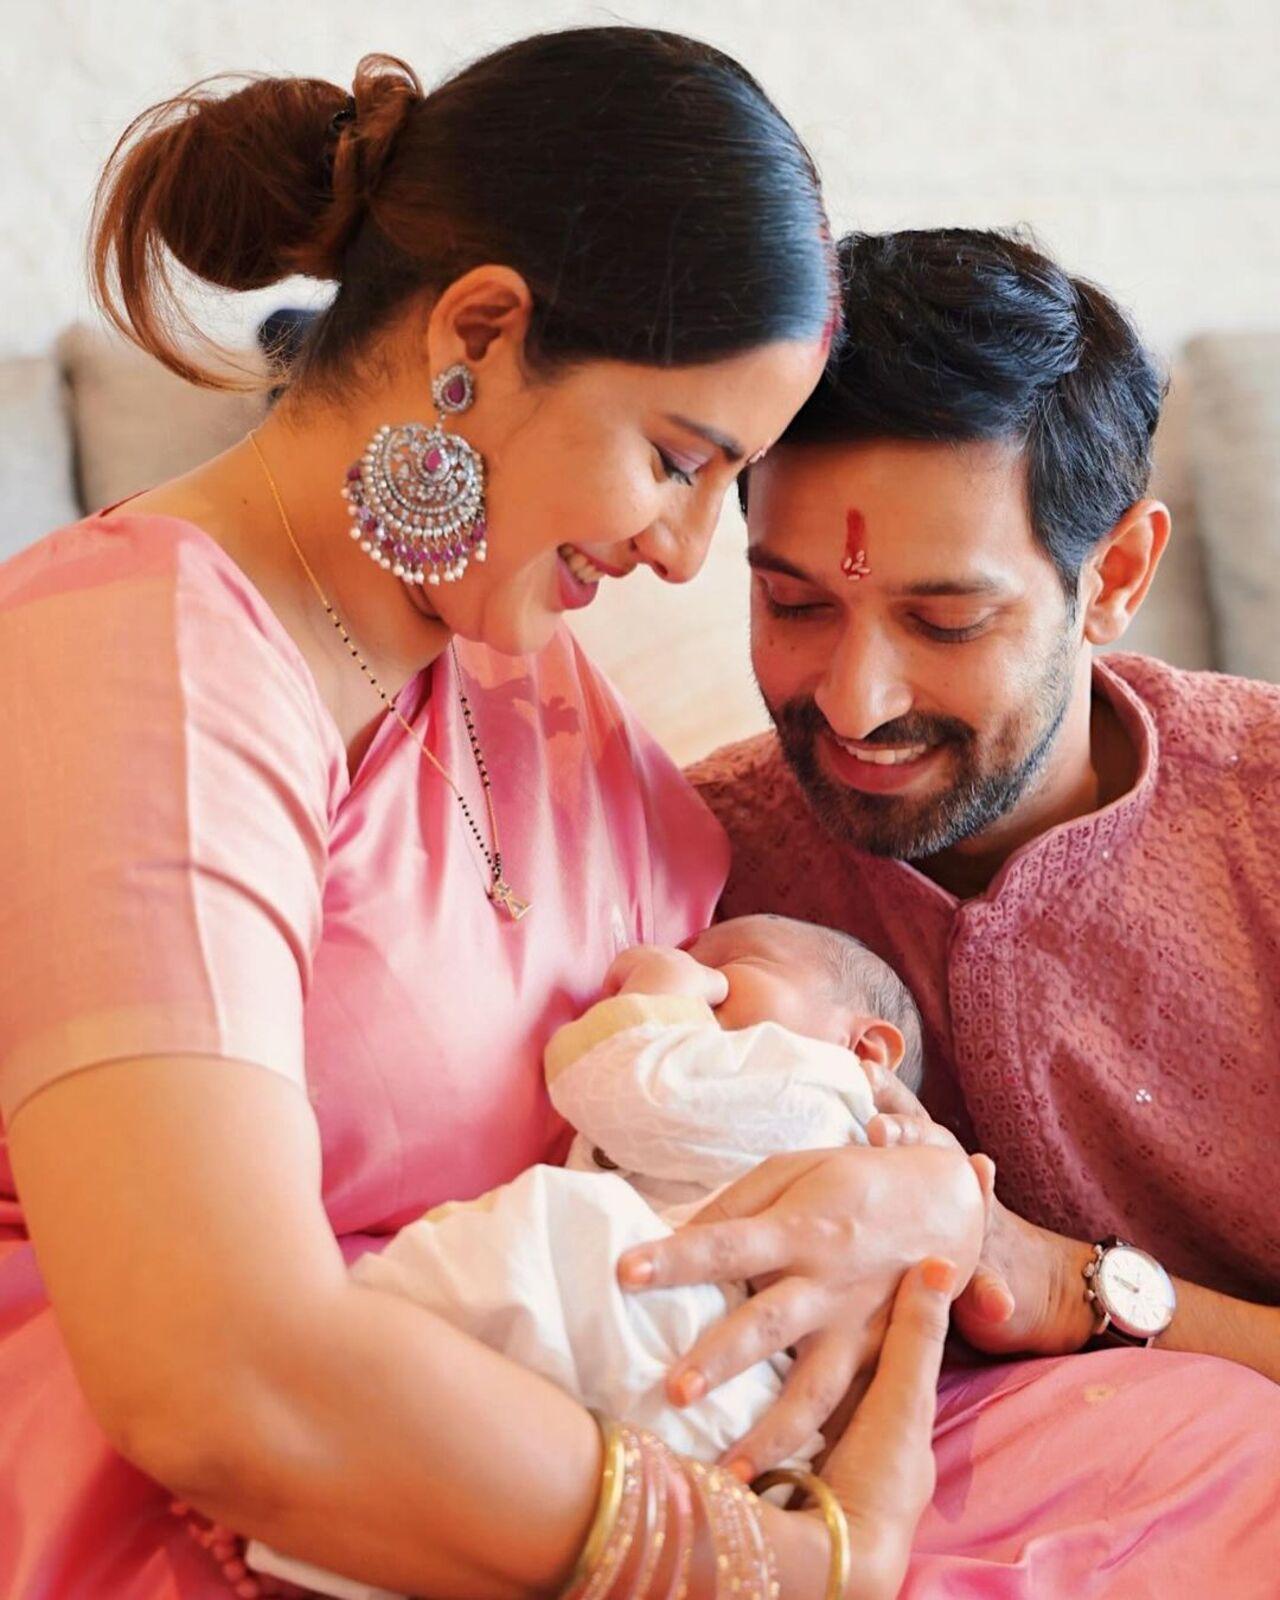 Vikrant Massey and Sheetal Thakur welcomed their first child in February 2023 this year. The couple had tied the knot in 2022 after dating for a long time